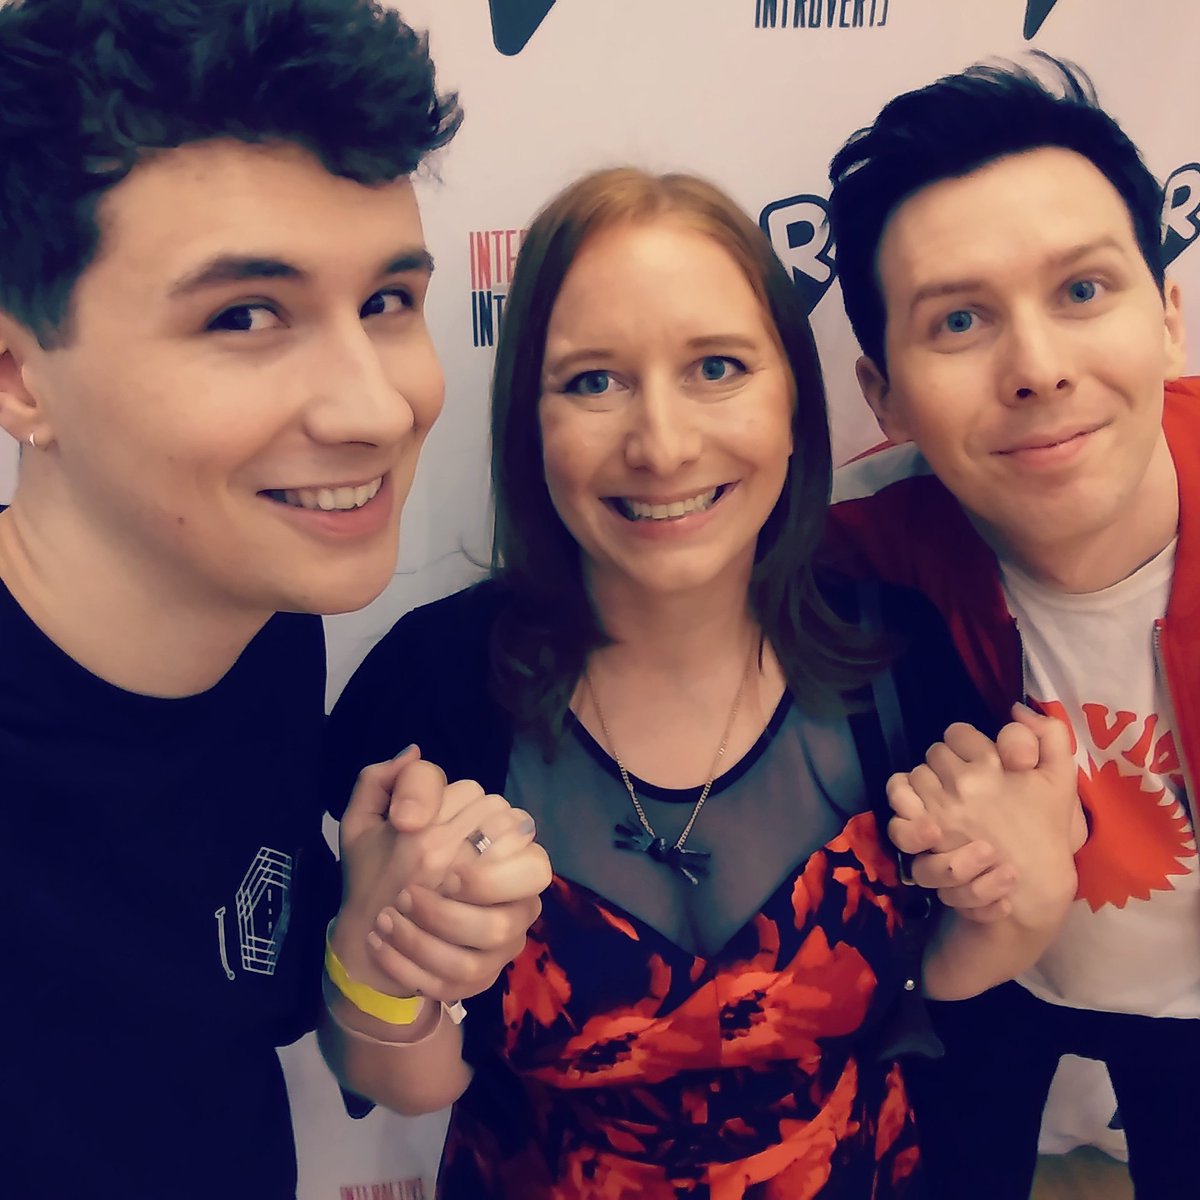 2018 is when I got to meet  @danielhowell &  @AmazingPhil in person! I even travelled out of the country to meet them because I'll do anything for the fandoms I love! And I got to experience their 2nd stage show with  @silentdescant in LA 